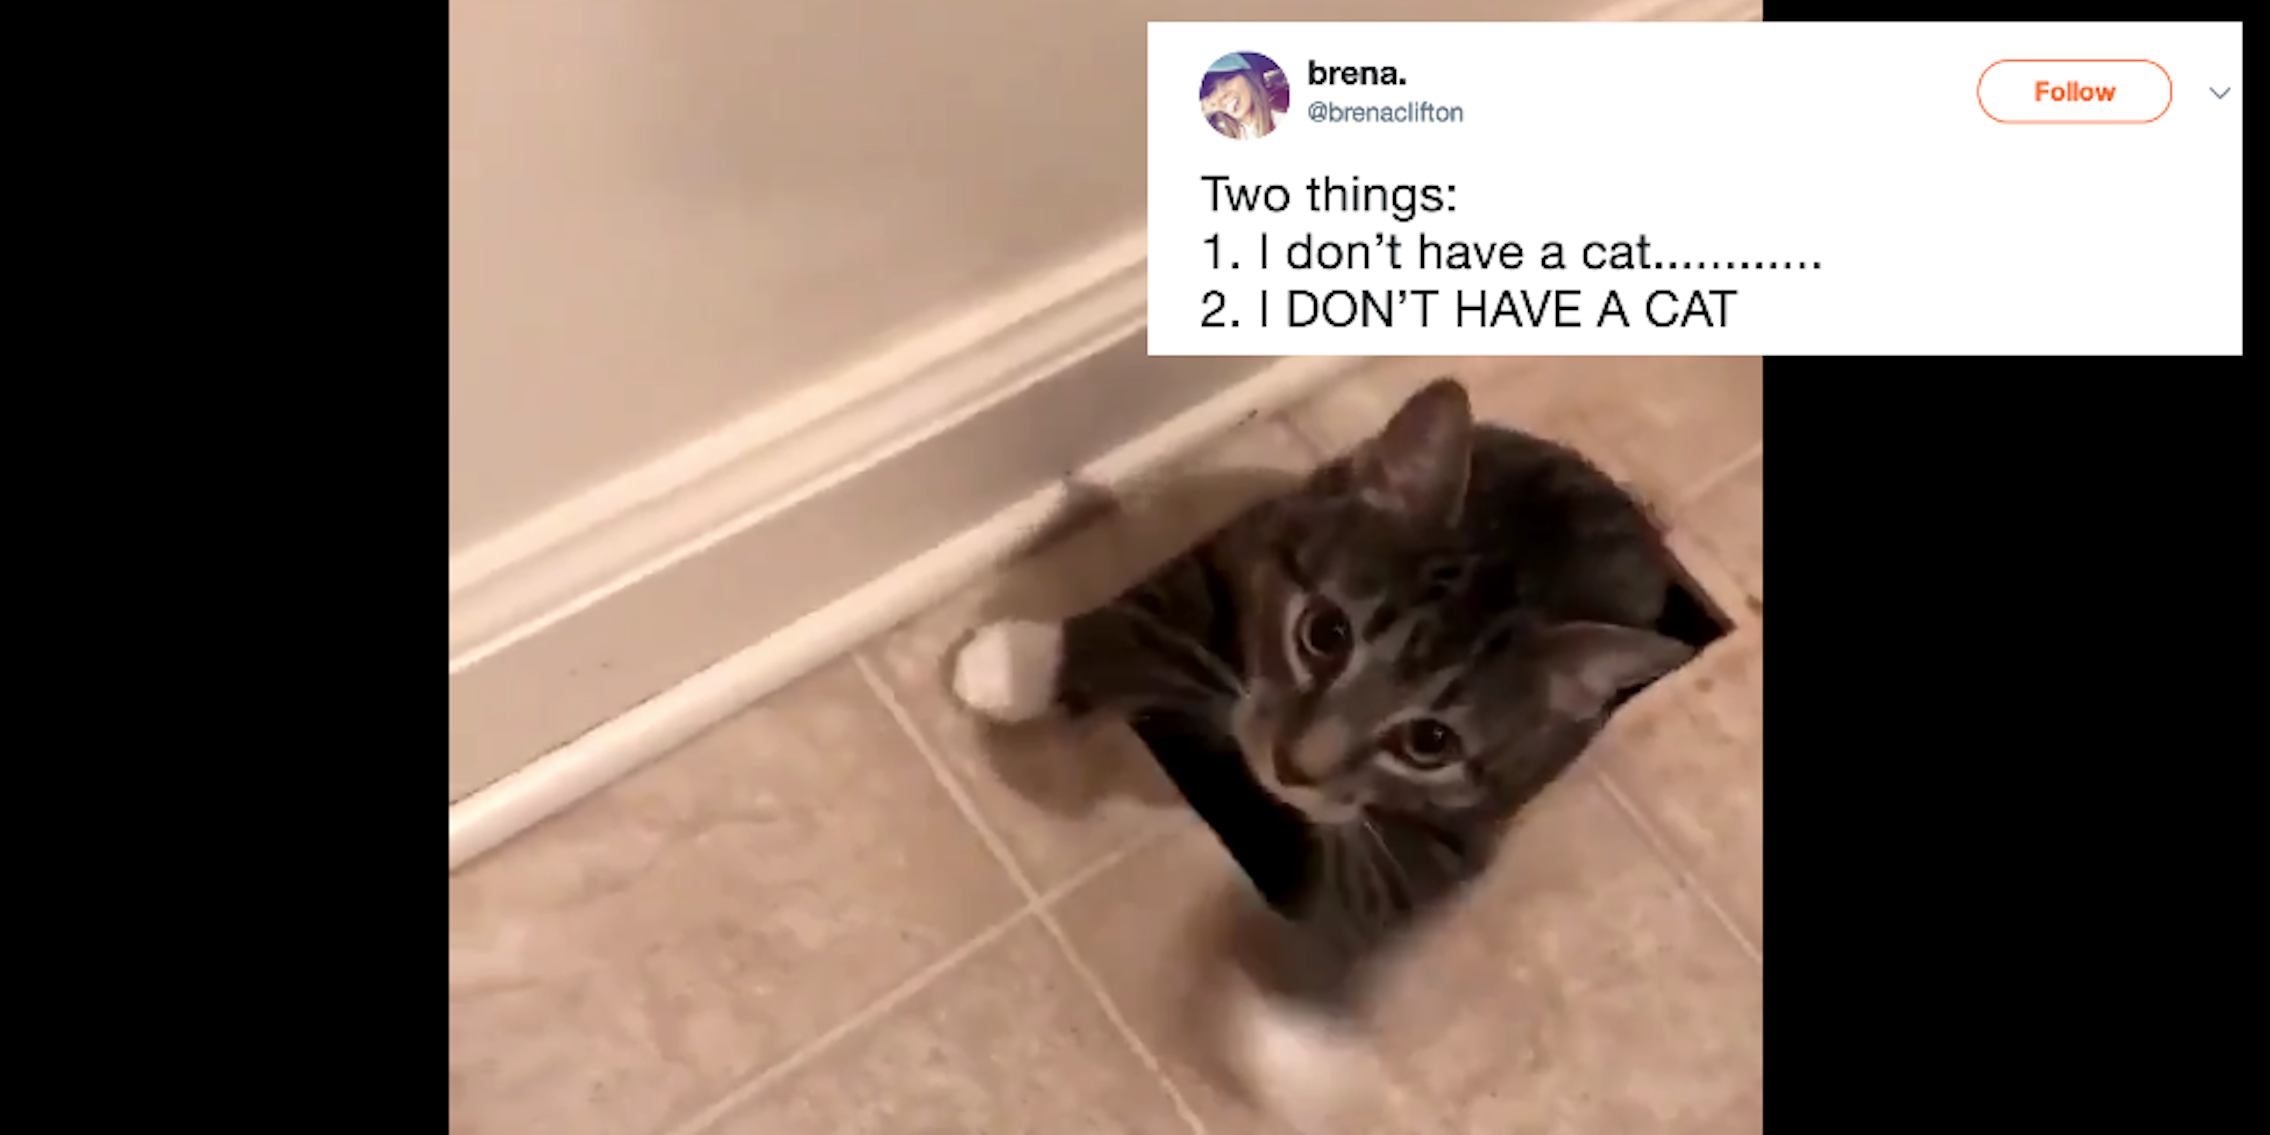 Cat crawling up vent in viral video.